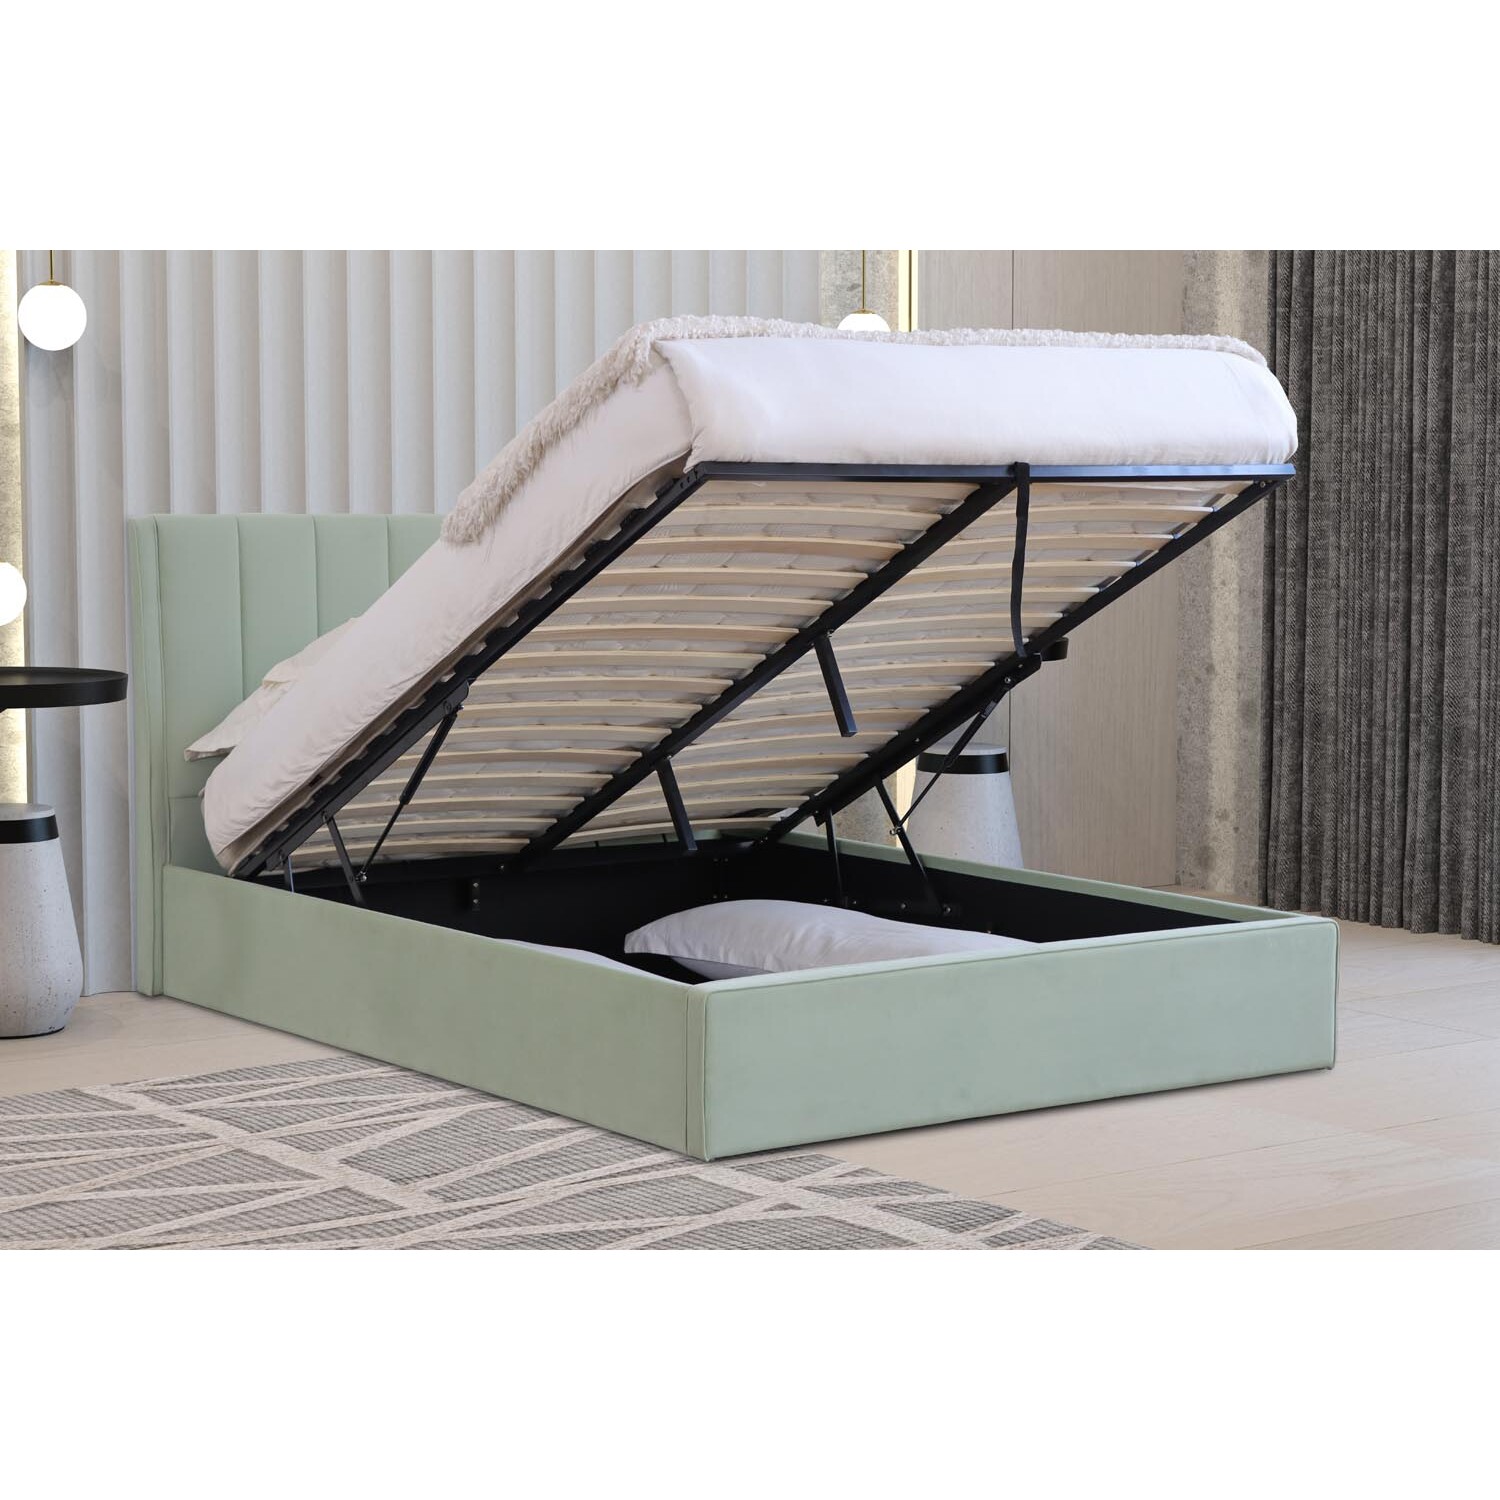 Willow Double Mint Ottoman Bed Image 9